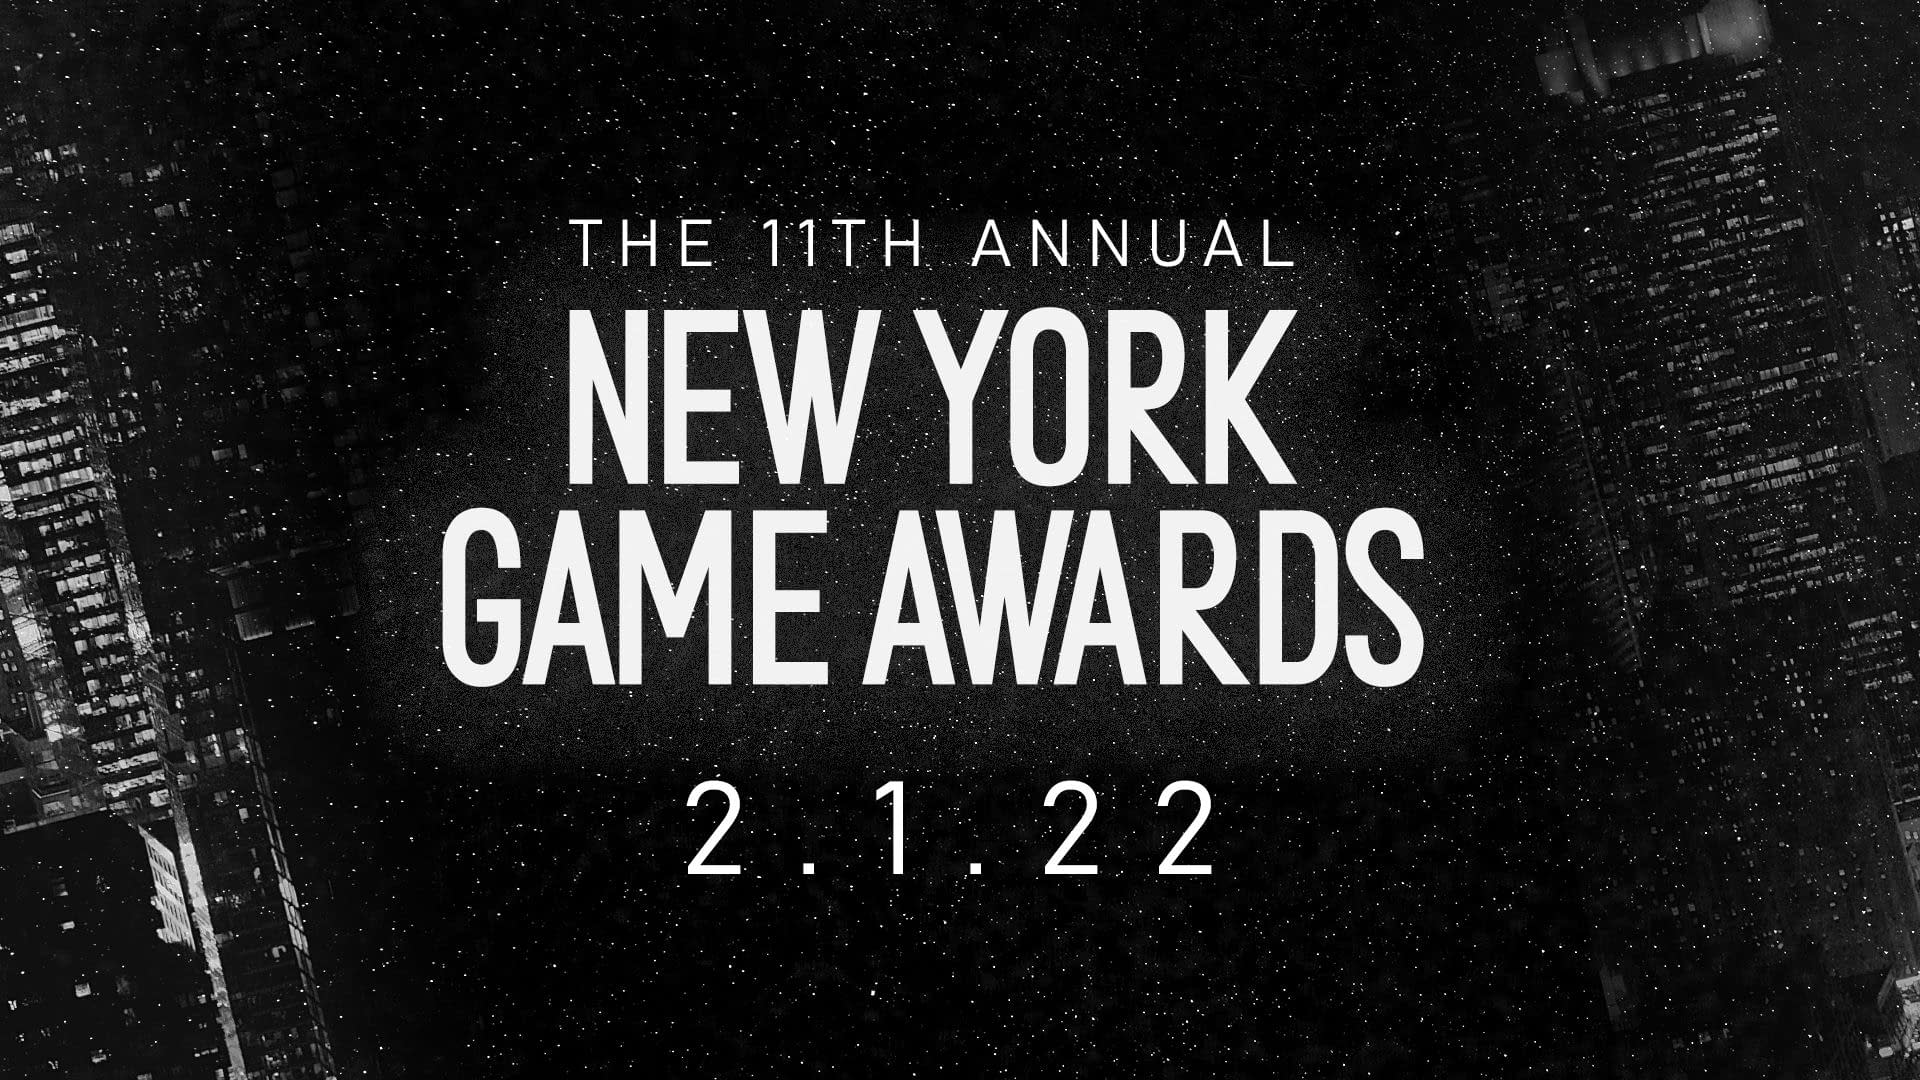 All The Winners From The Game Awards 2022